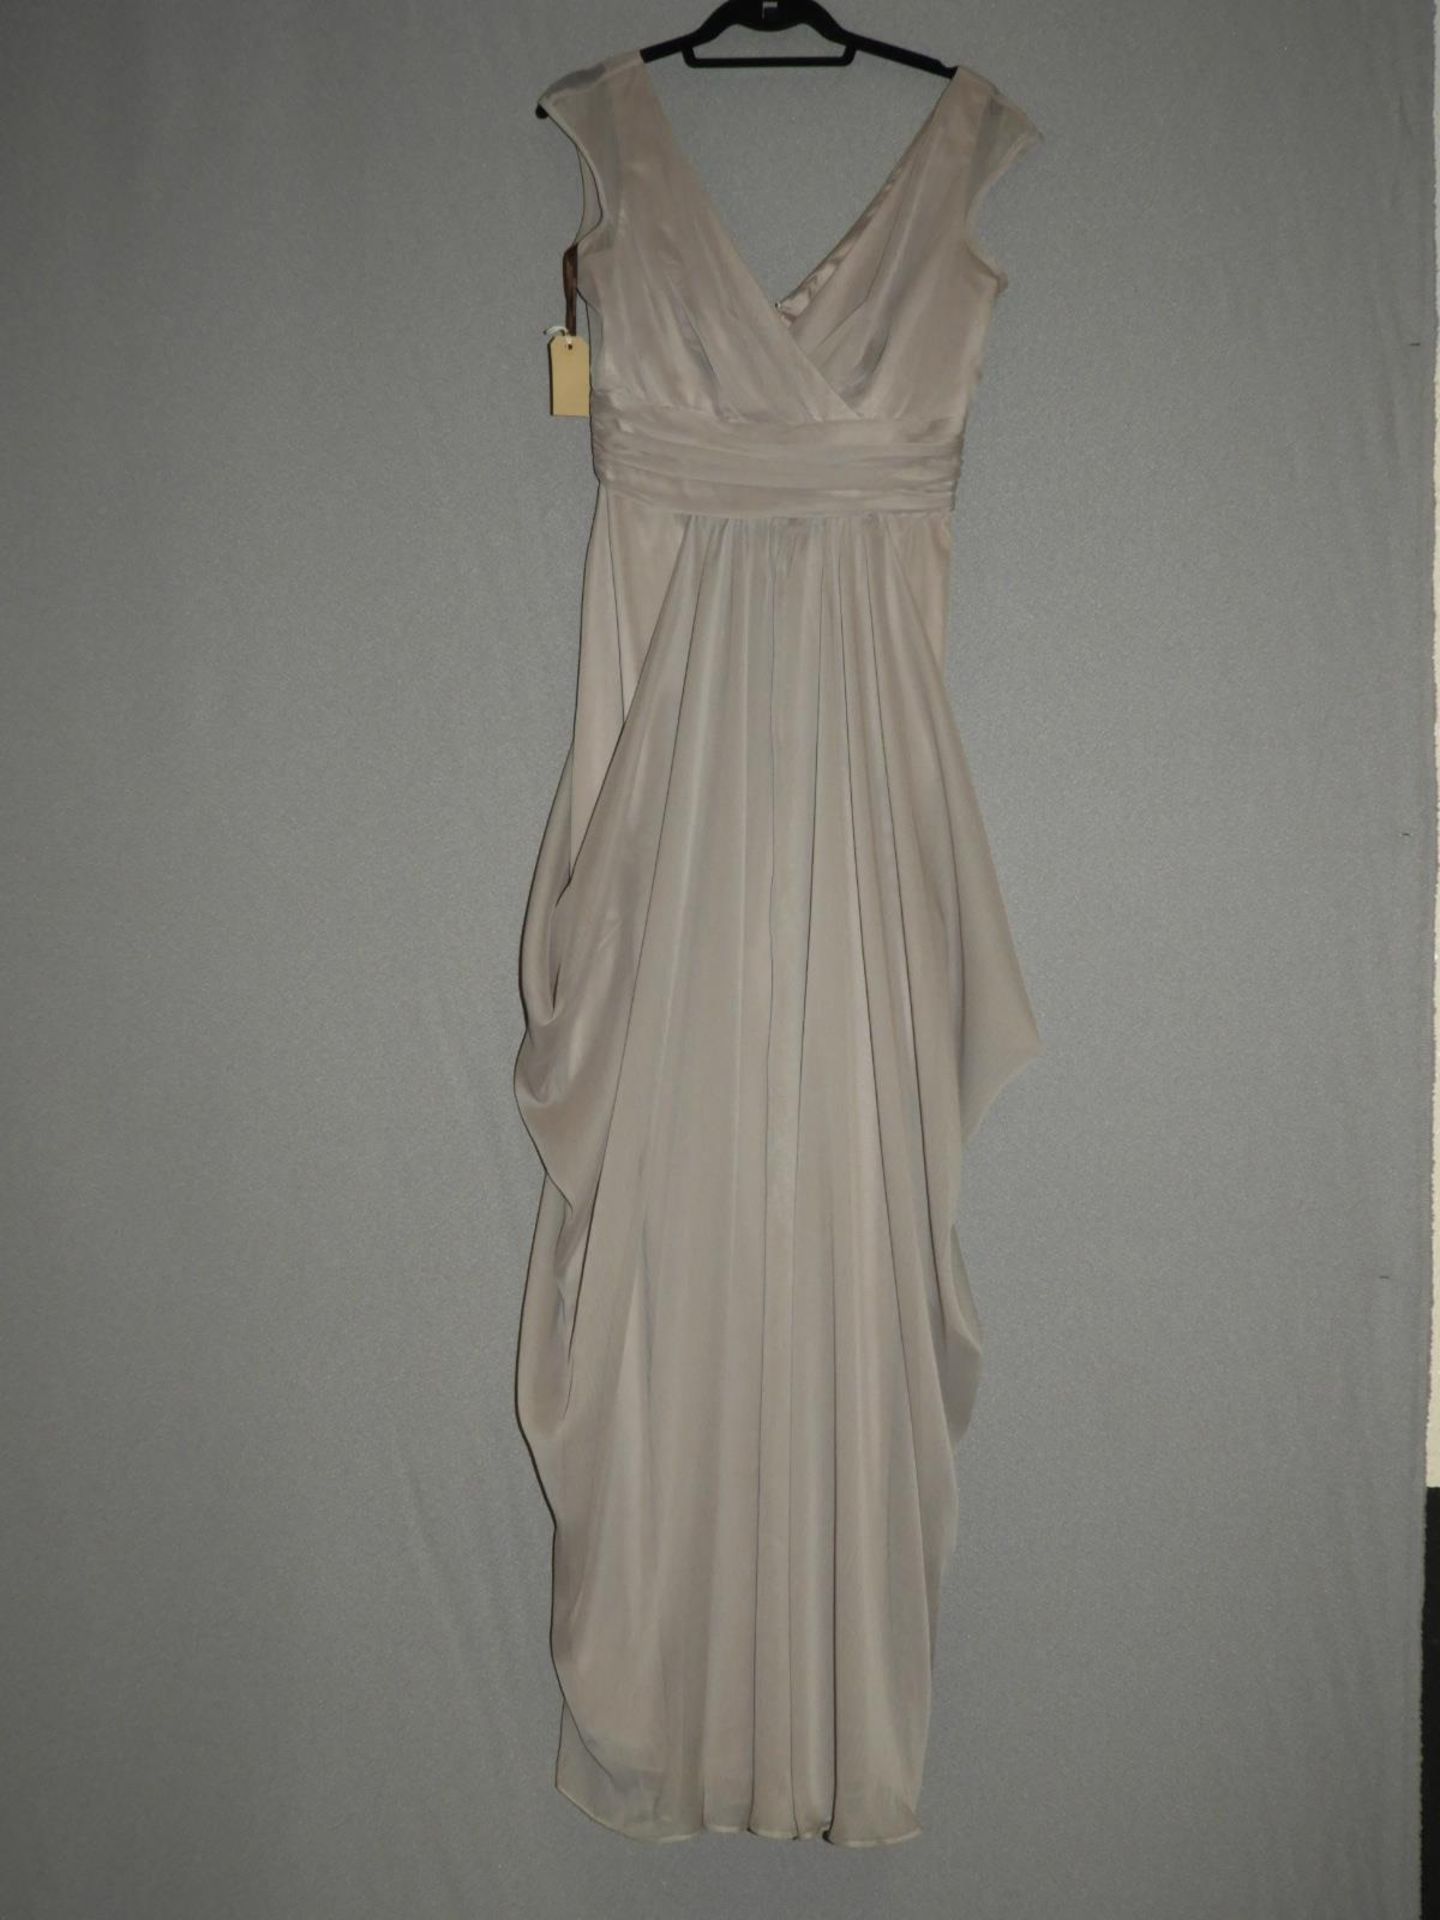 *Size: 8 Pale Brown Bridesmaid Dress by Lola Rose